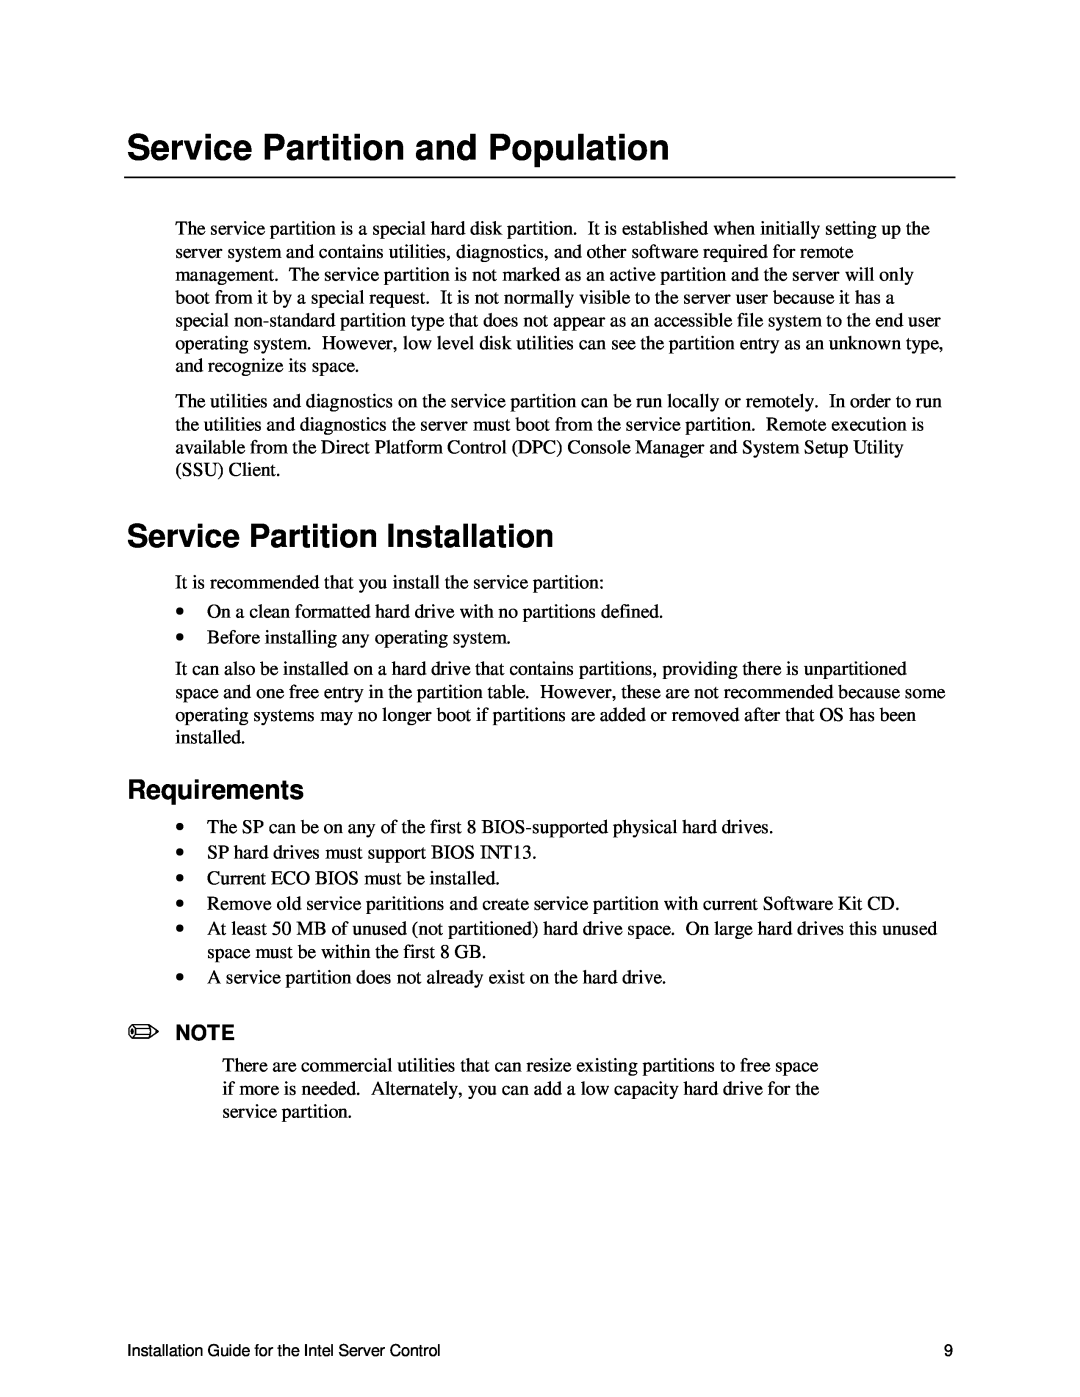 Intel 747116-011 manual Service Partition and Population, Service Partition Installation 